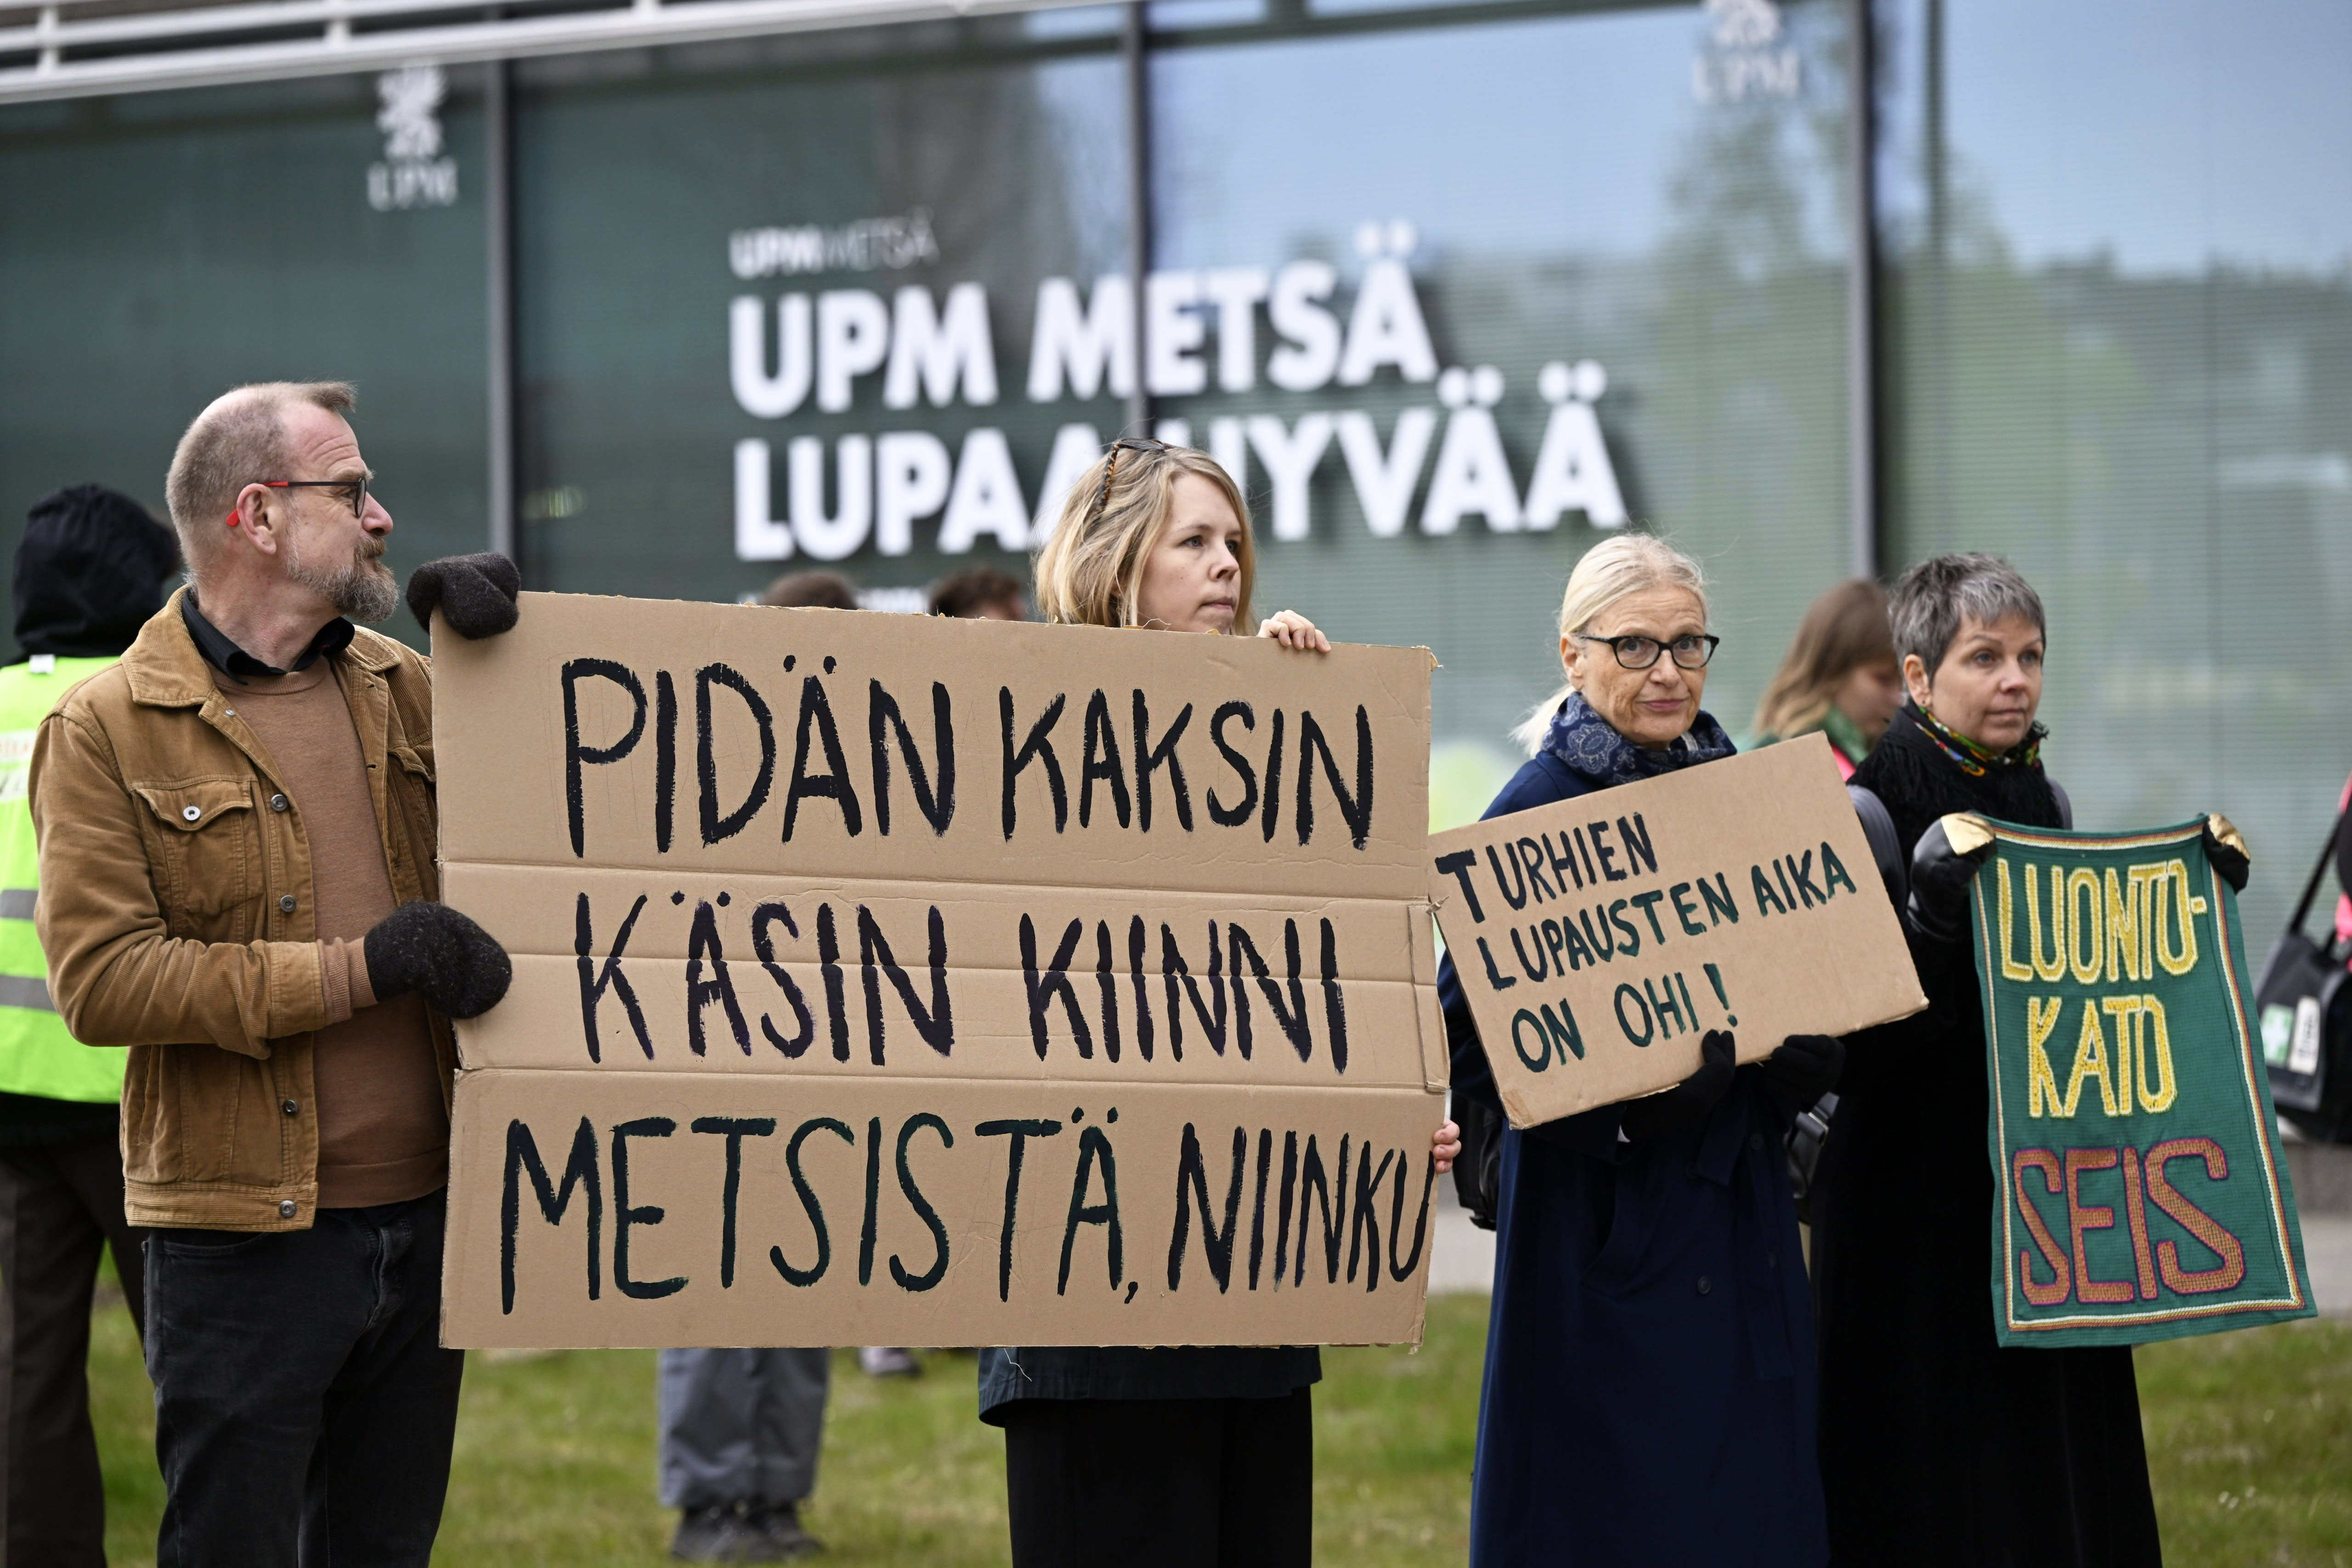 Climate activists block access to UPM’s pulp mill and demand an end to greenwashing